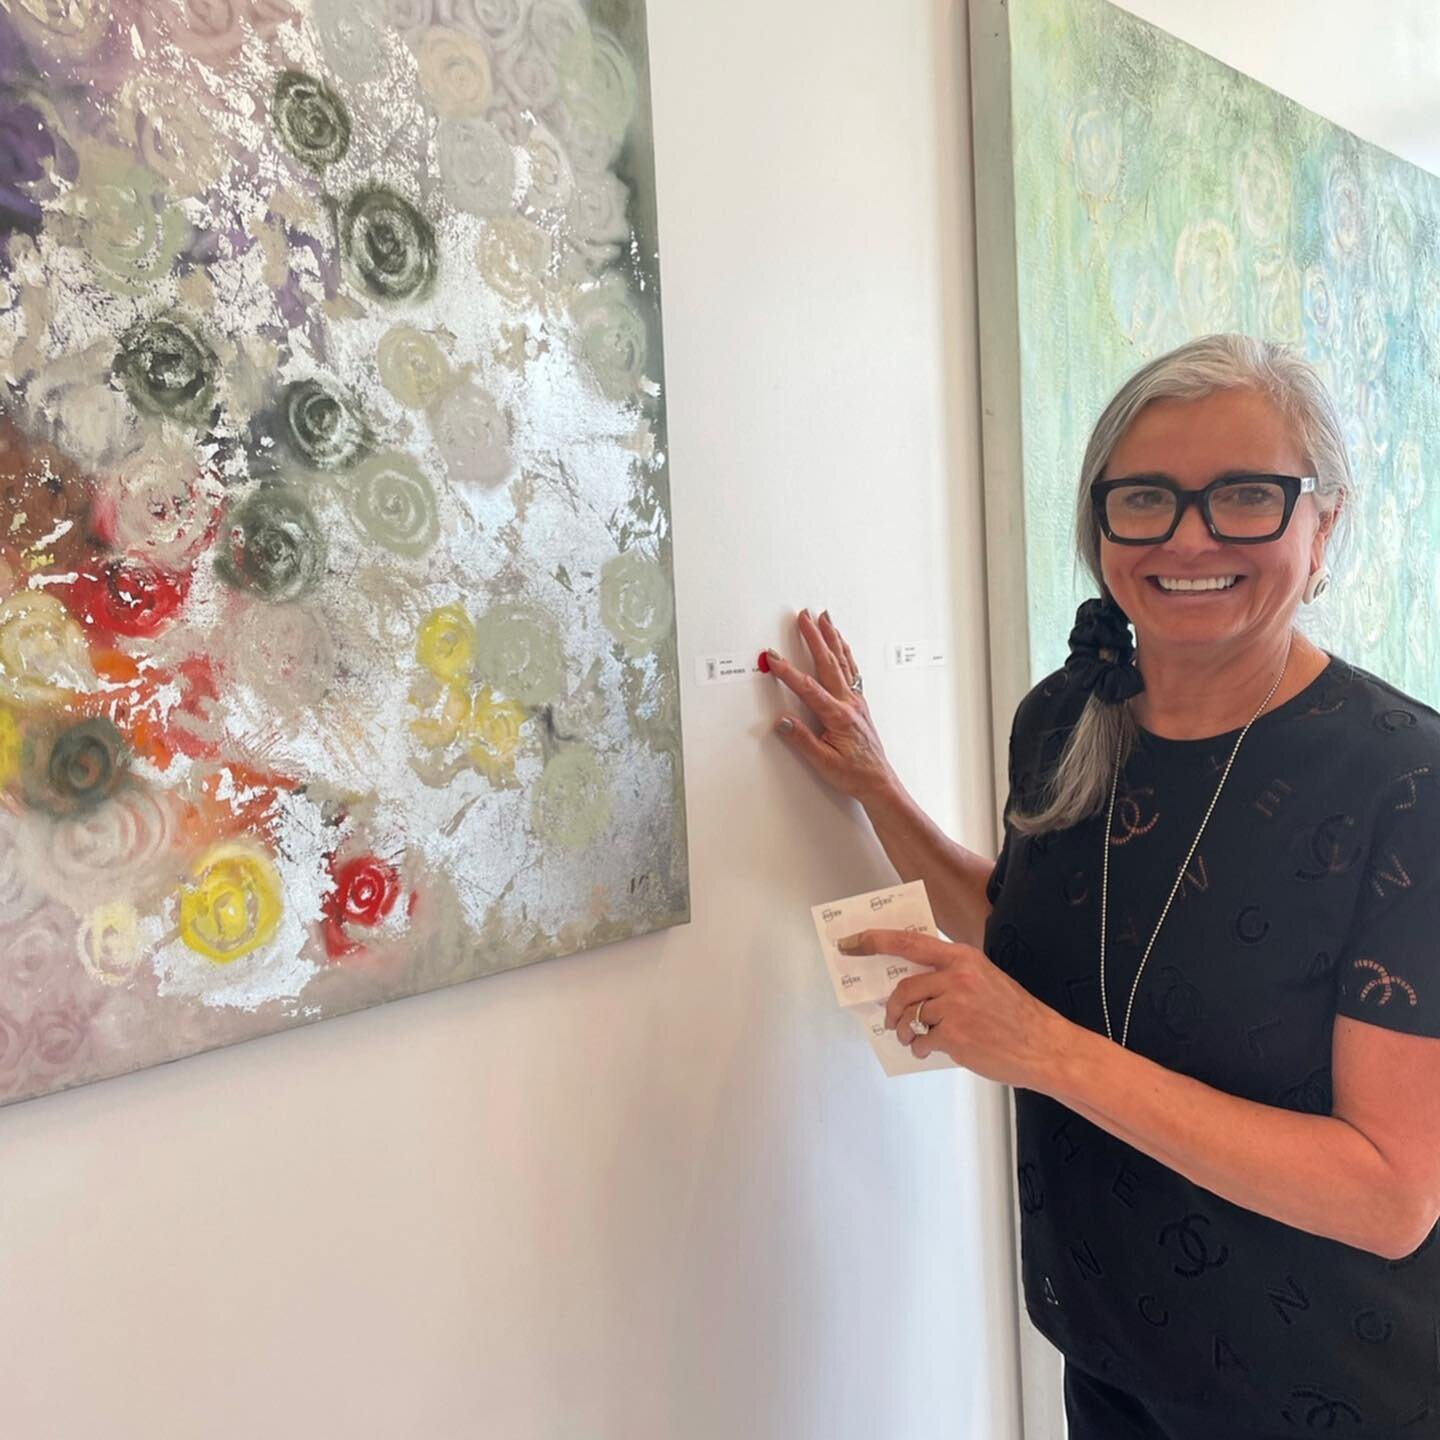 As we start our June countdown we are thrilled to partner with some amazing companies and individuals who are long term supporters of the art community in Cayman. Cayman Art Week simply wouldn&rsquo;t be possible without them! Thank you Susan A. Olde